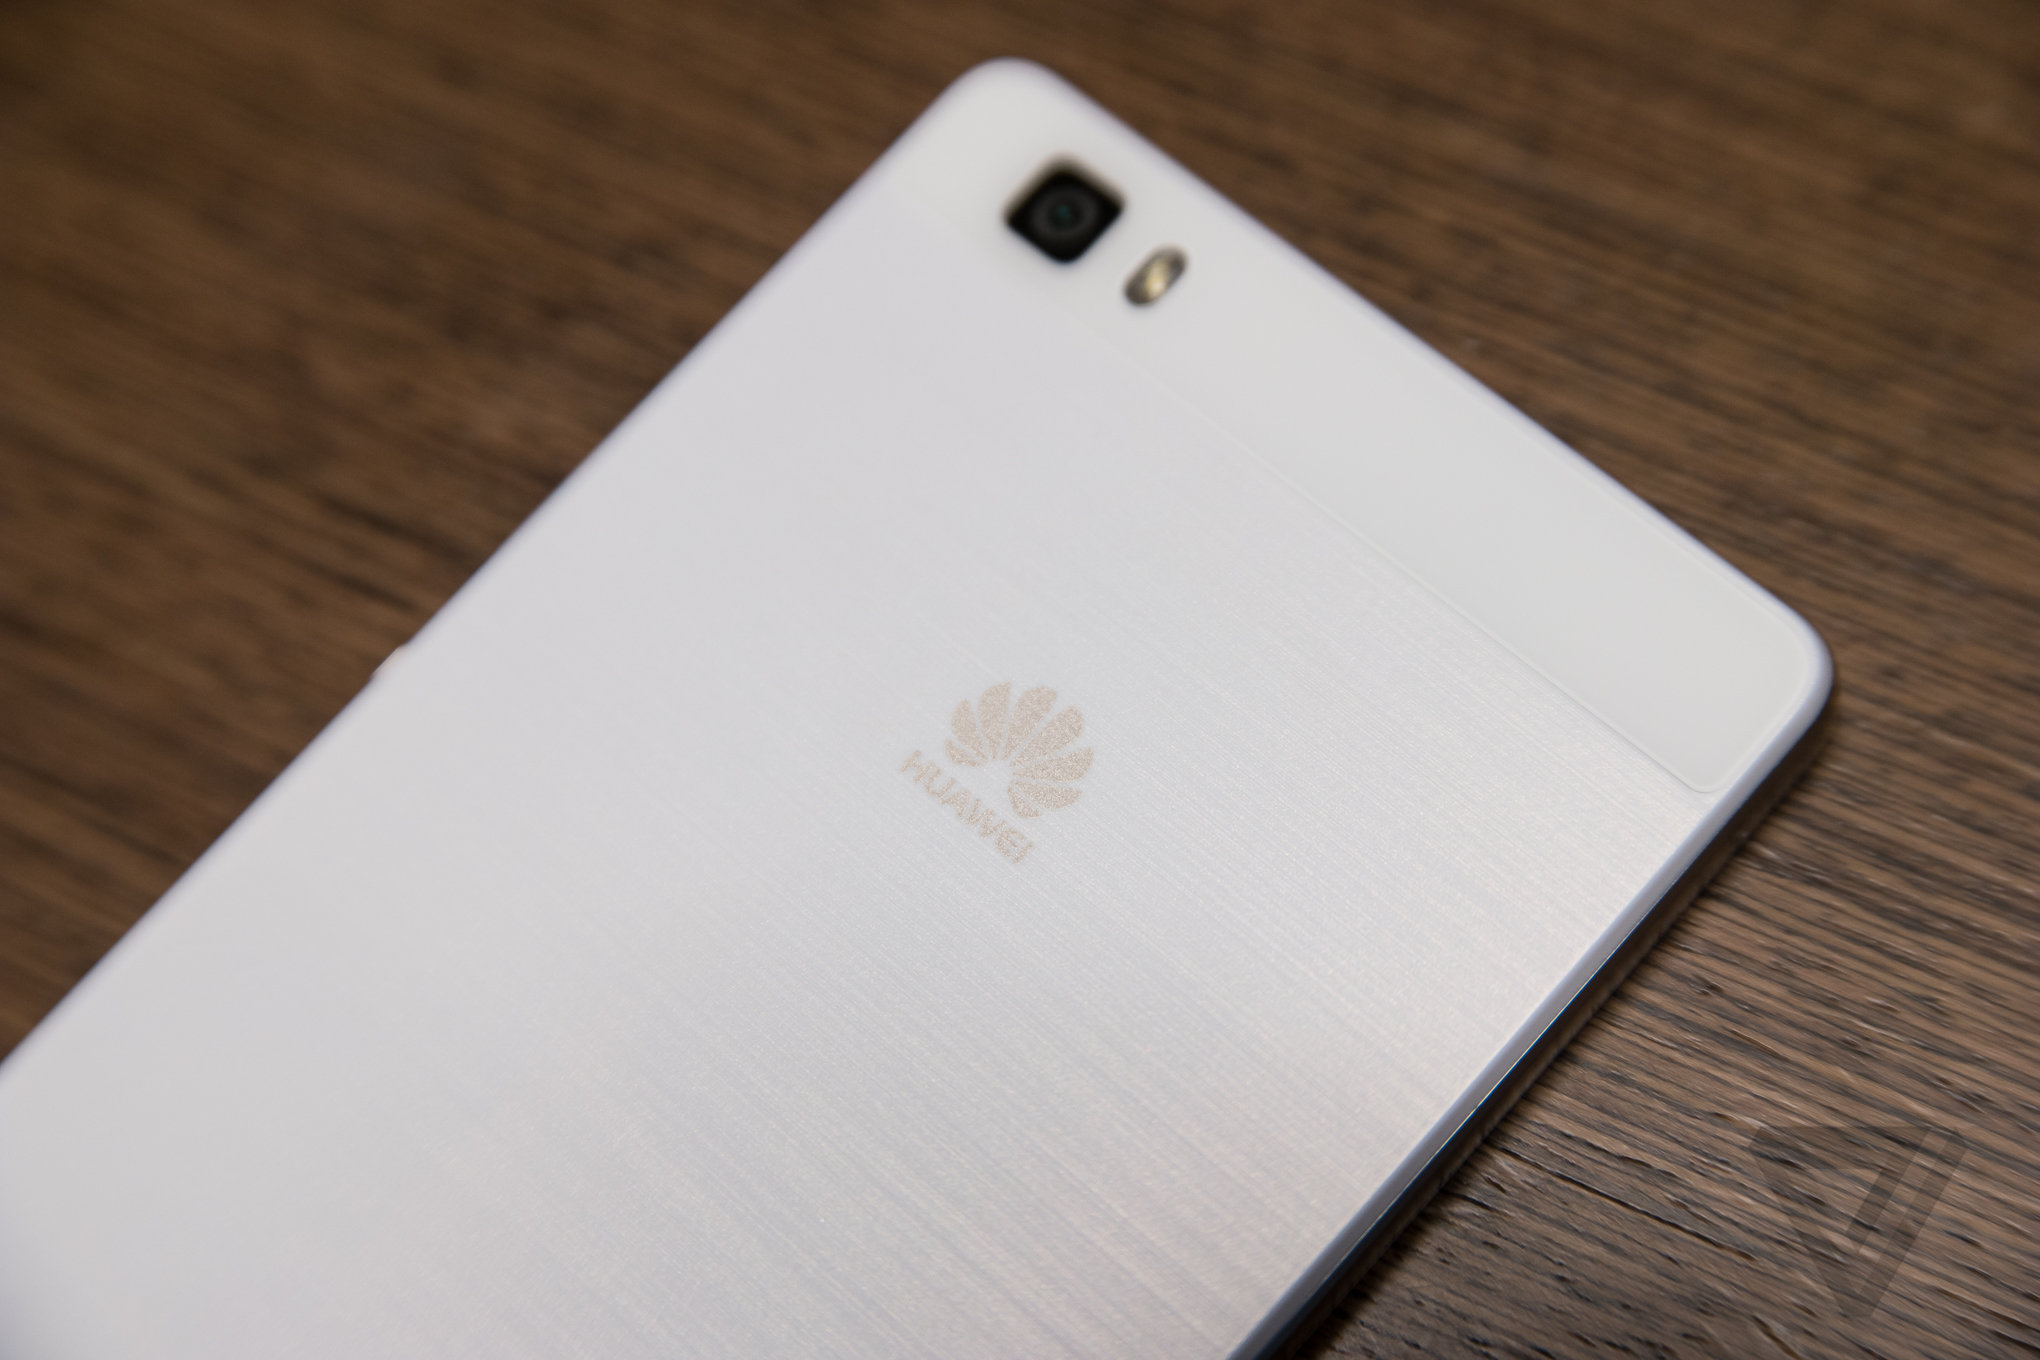 Beber agua Alexander Graham Bell Integración Huawei's P8 Lite shows it doesn't take the US seriously - The Verge